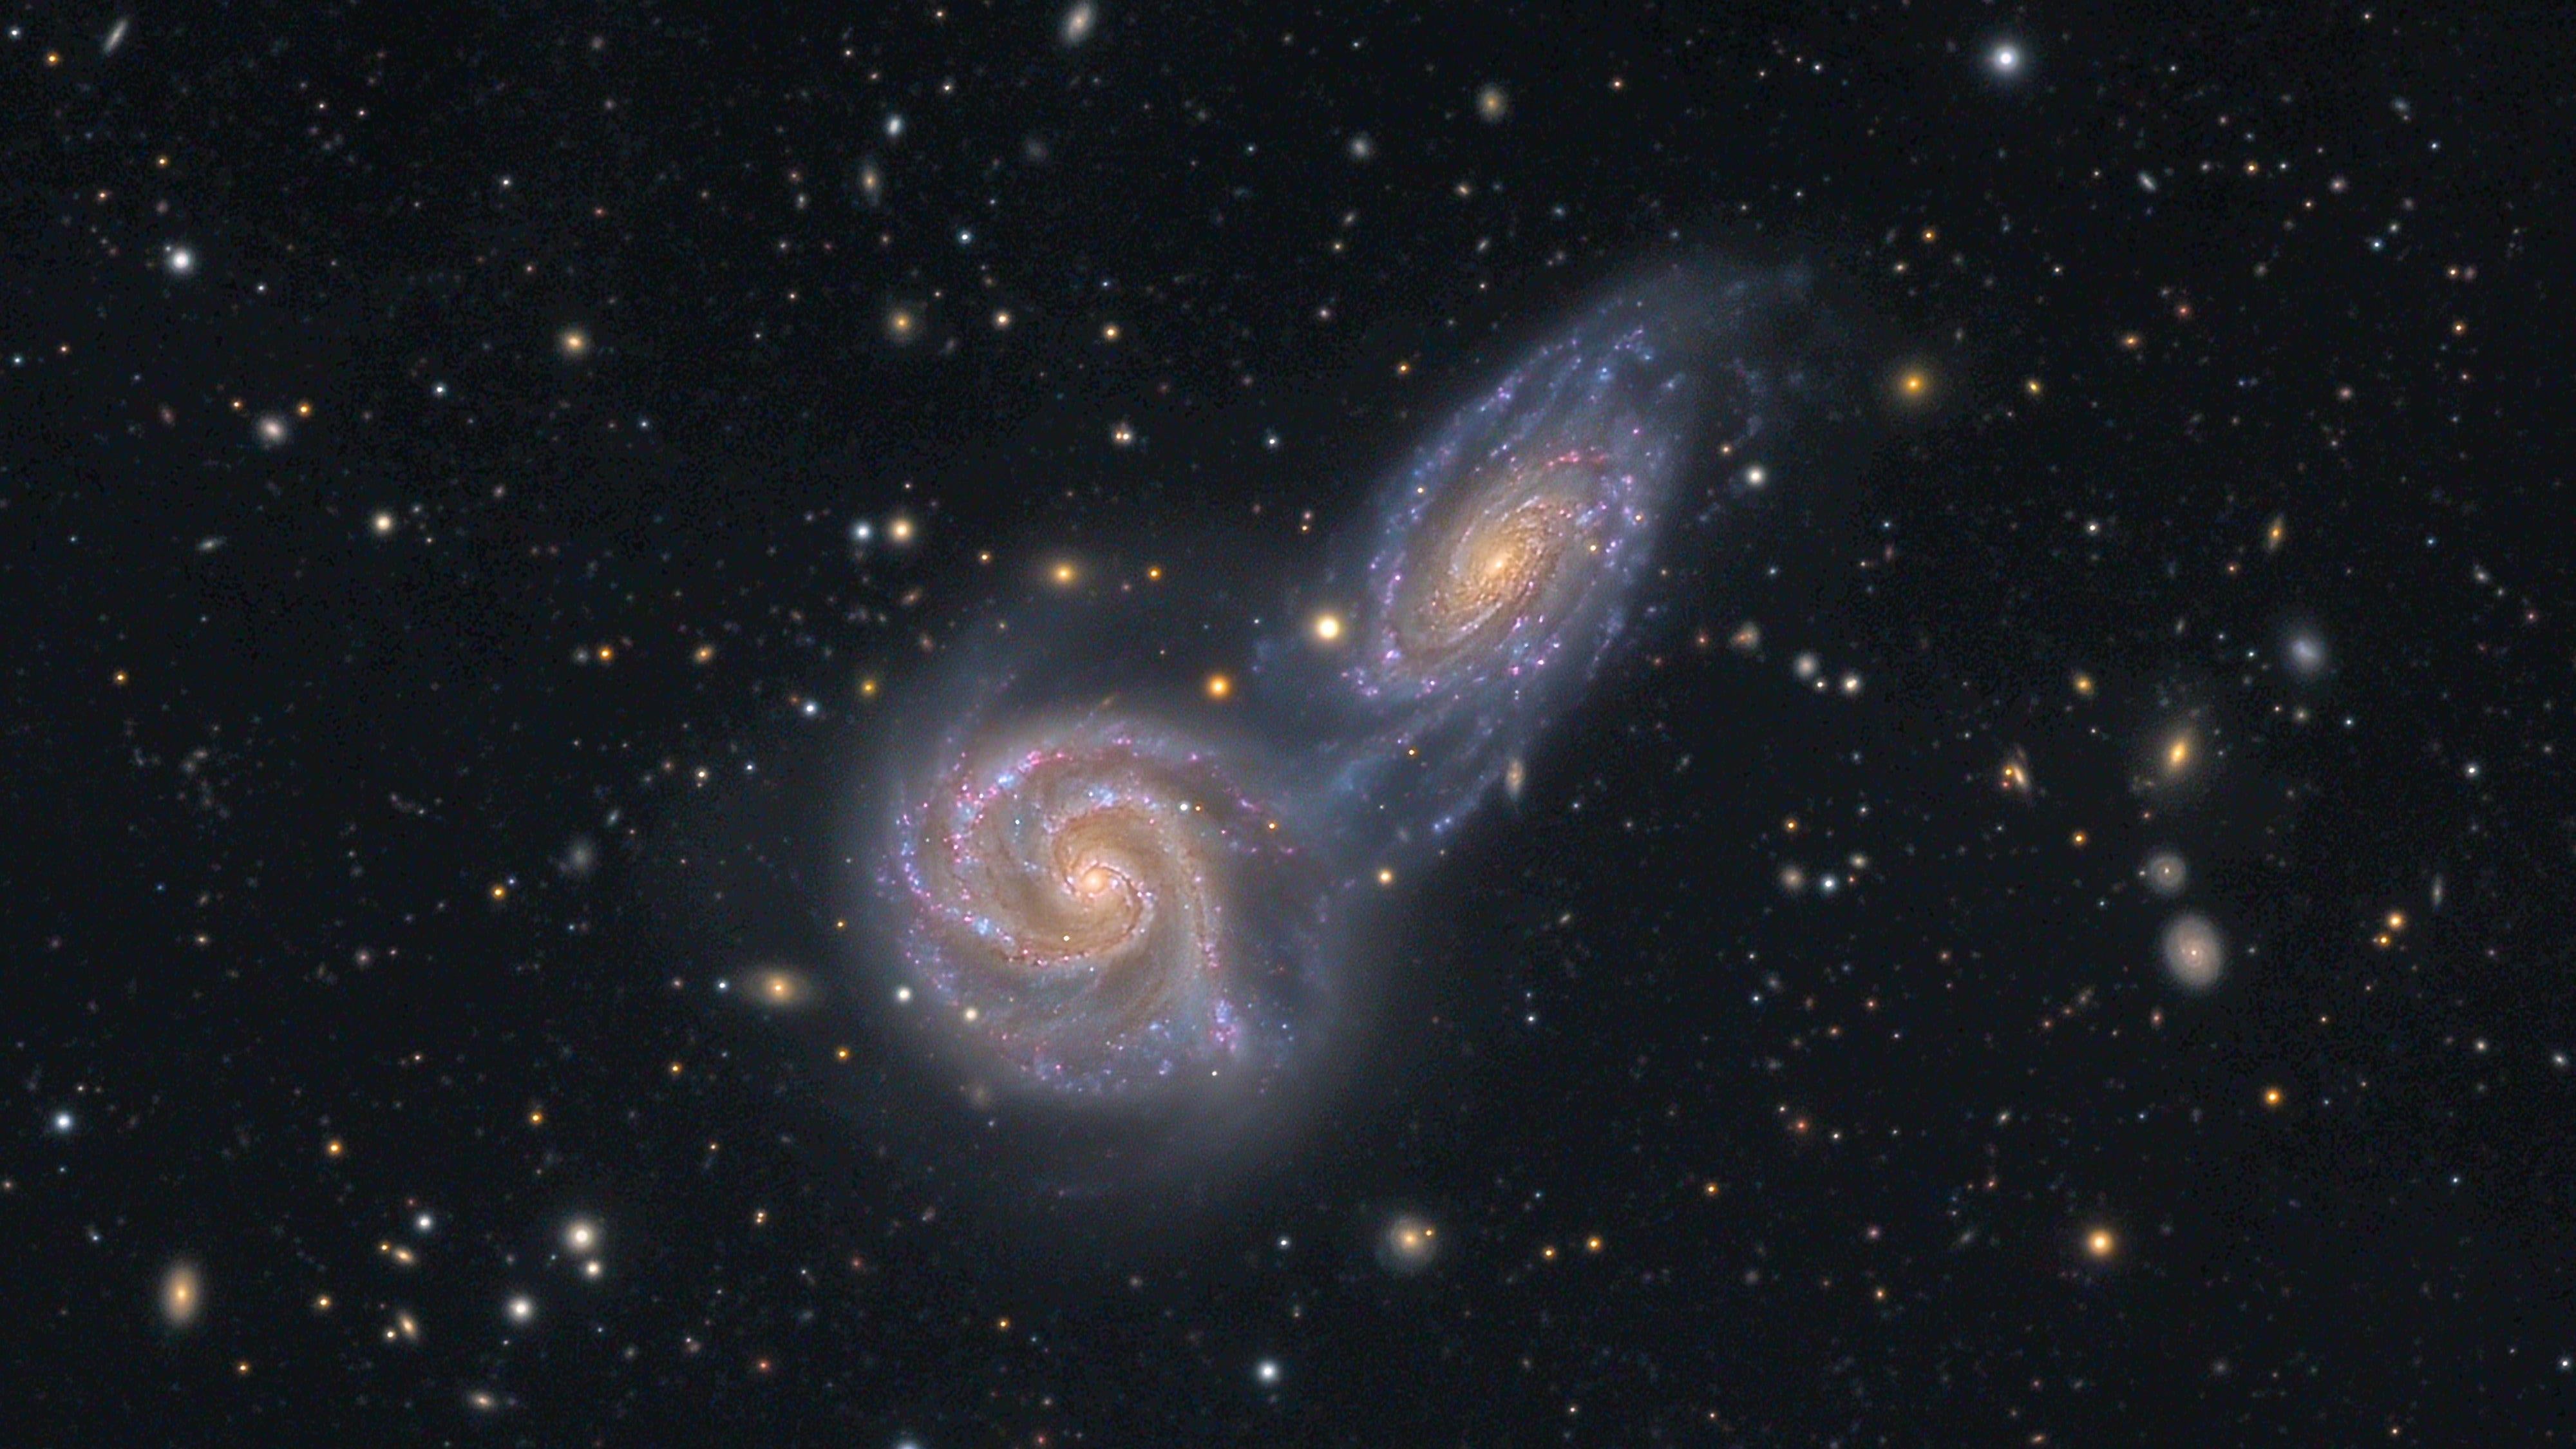 Two galaxies spin together. (Photo: © Mark Hanson, Mike Selby)